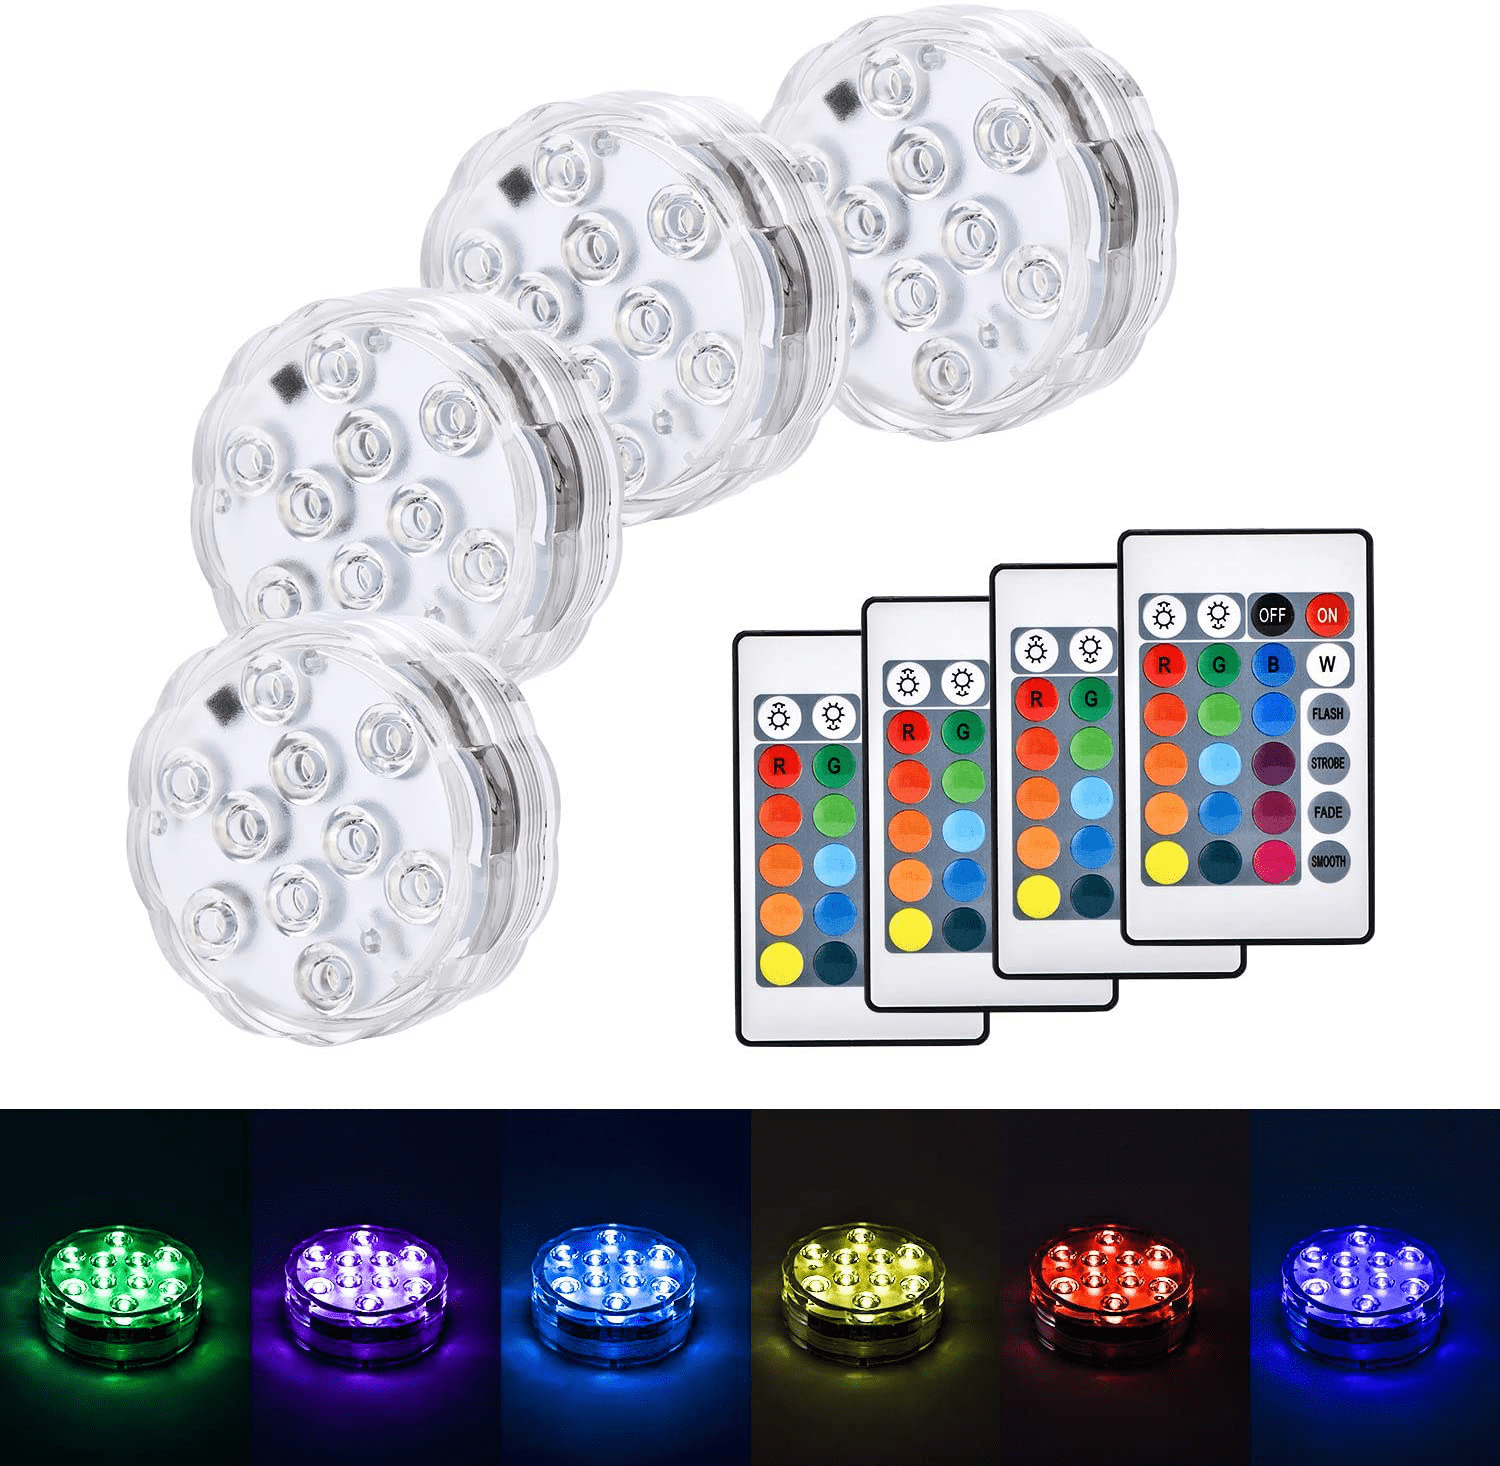 10PCS Multicolor Submersible LED Lights Waterproof W/ Remote Control Party Decor 